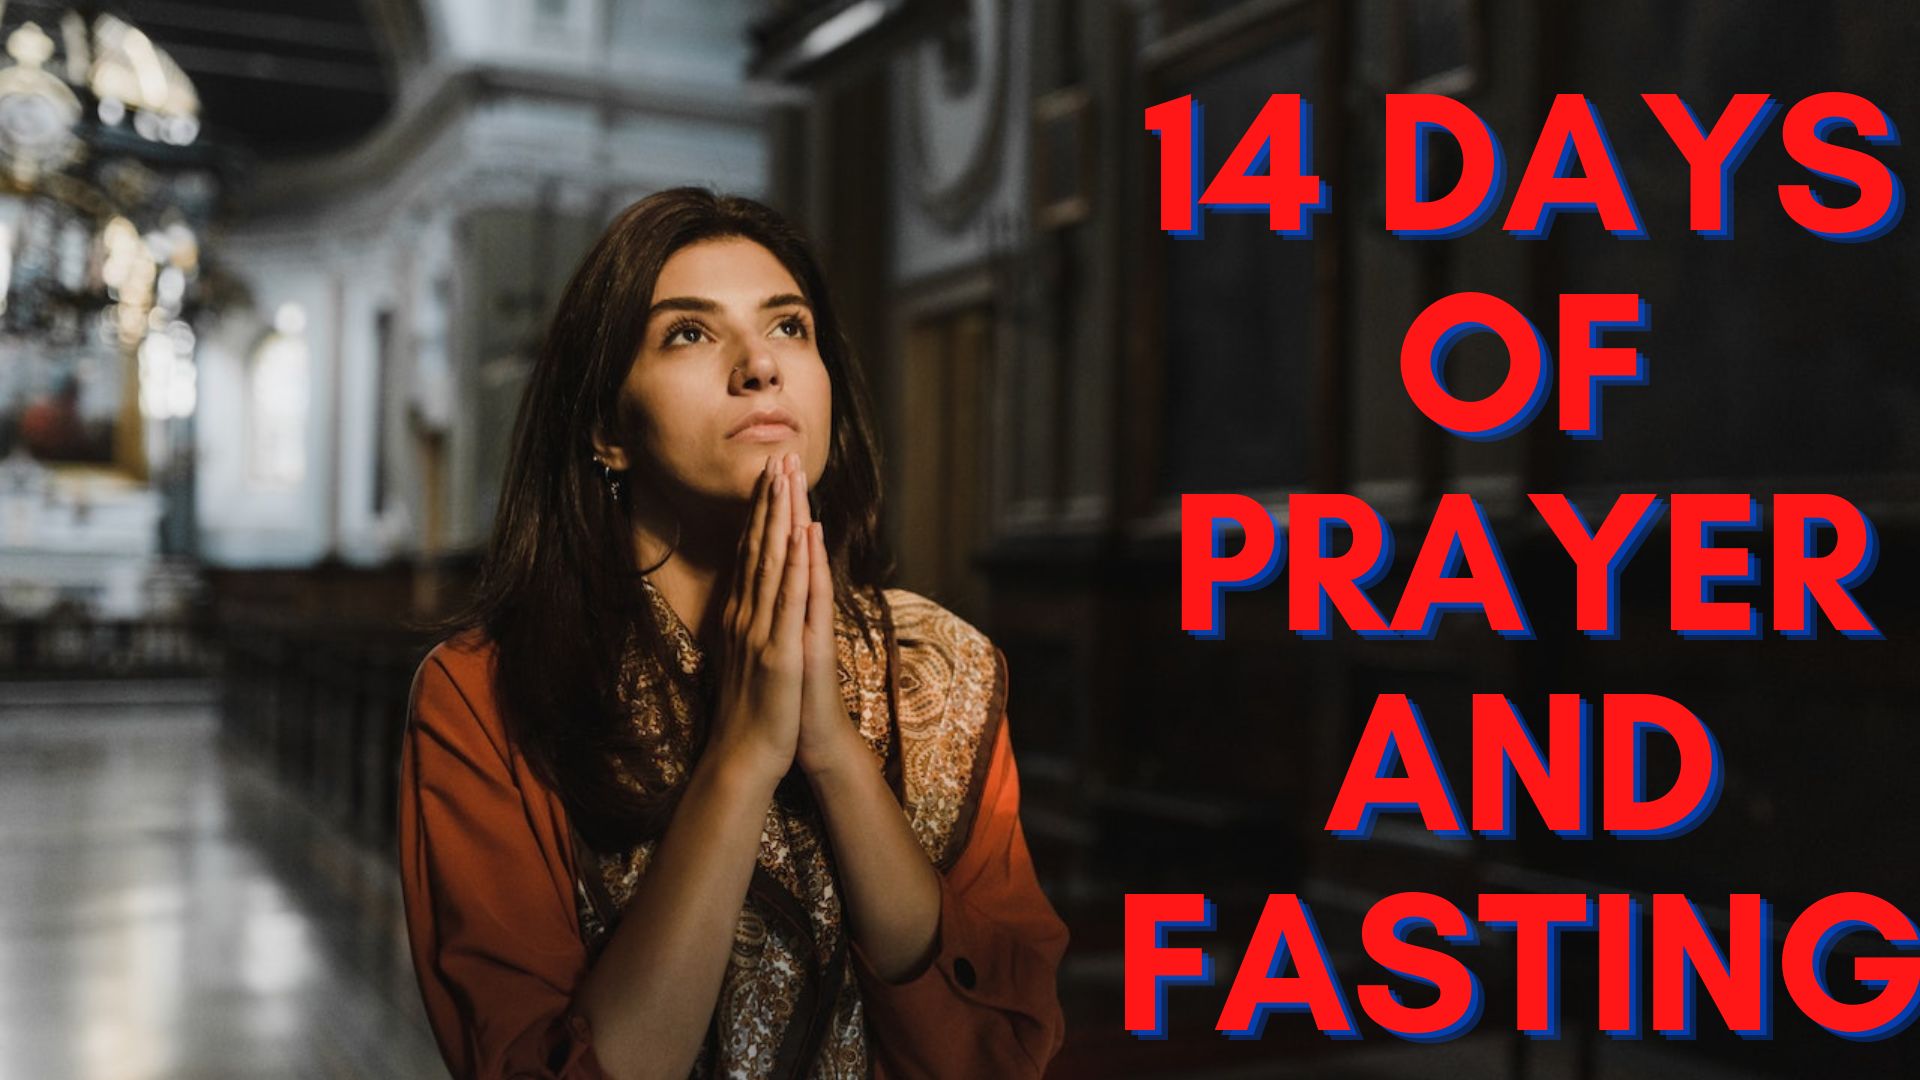 14 Days Of Prayer And Fasting